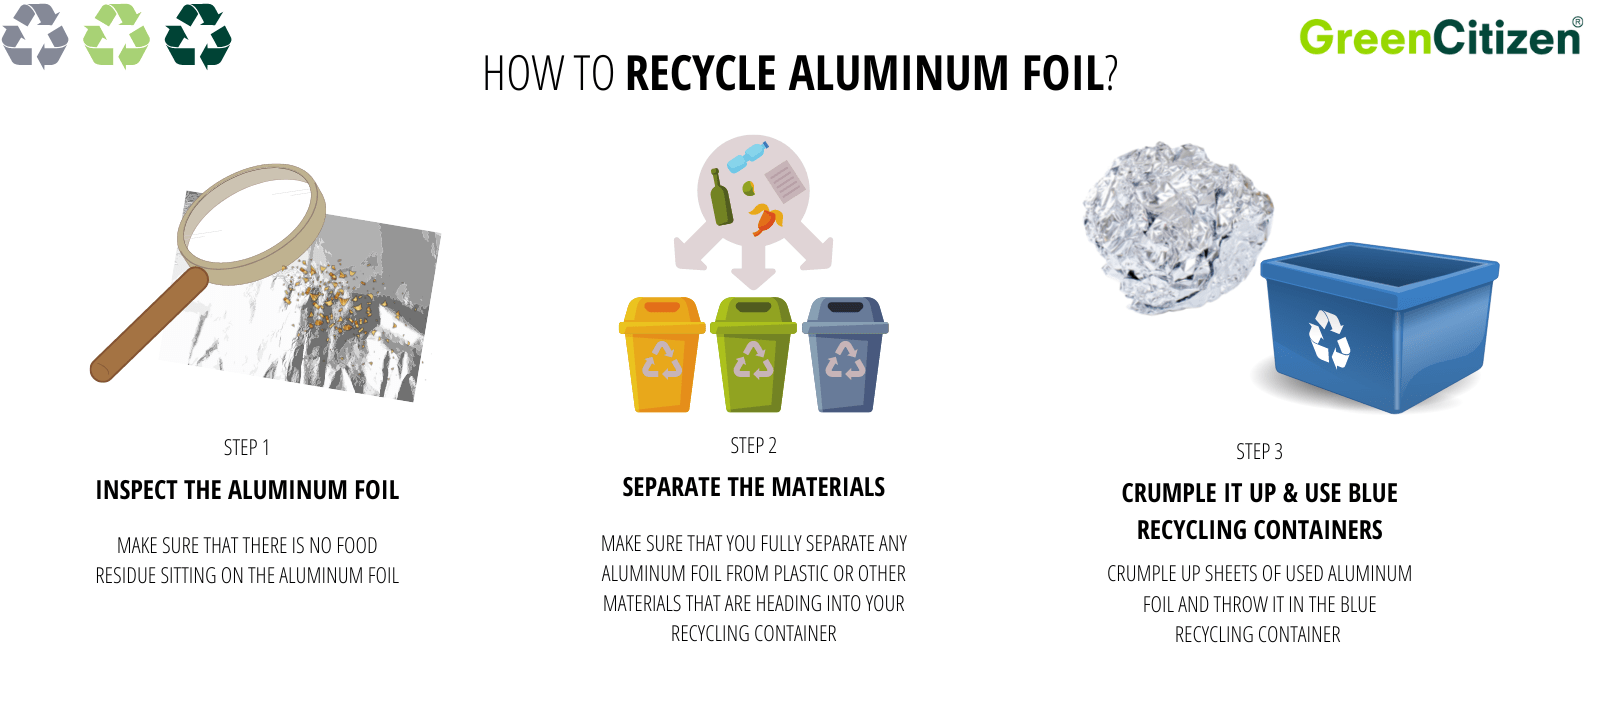 How to recycle aluminum foil